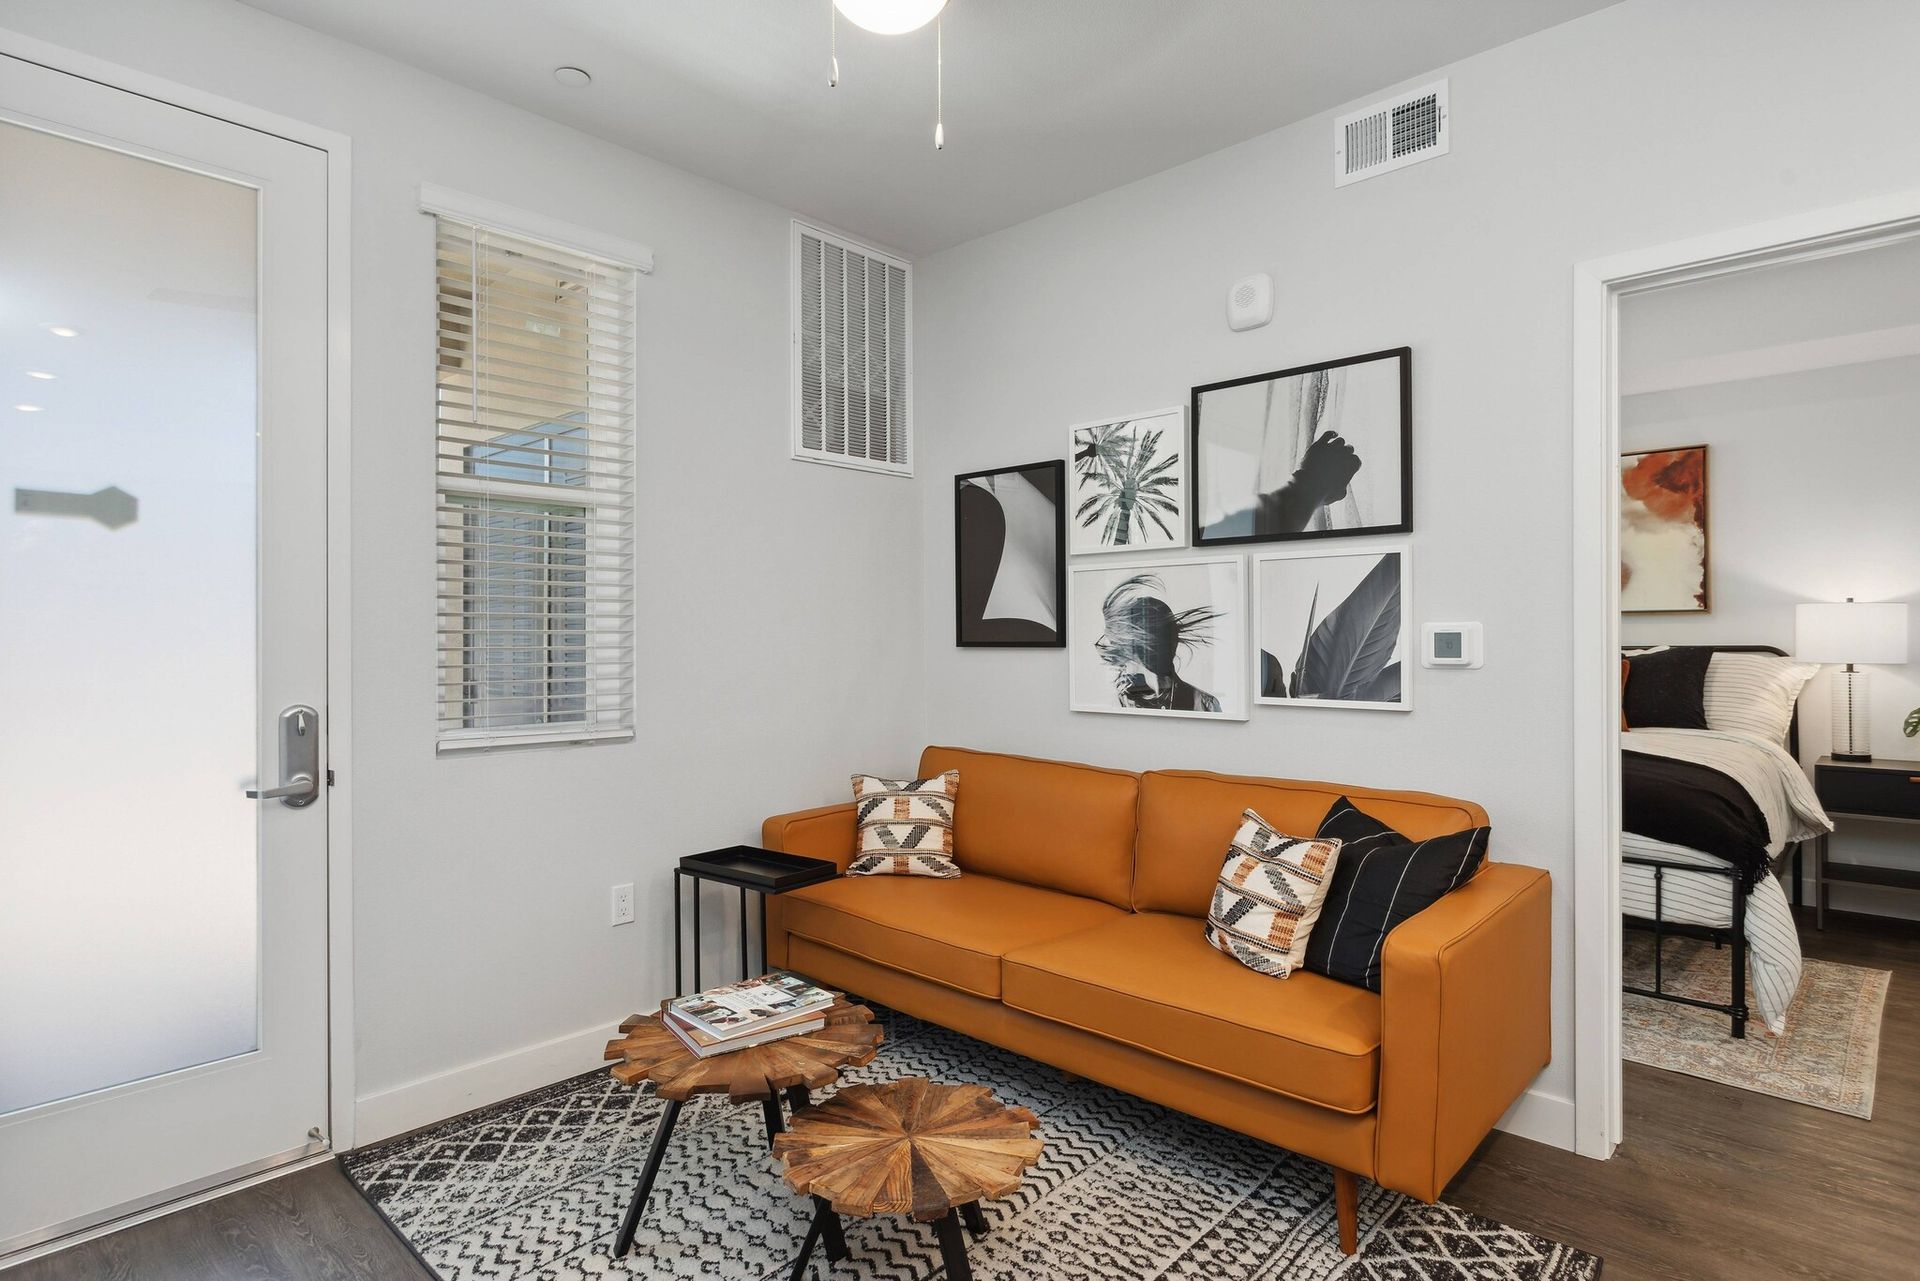 Modern living room with an orange sofa, wall art, and 2 coffee tables at Maven on Broadway.